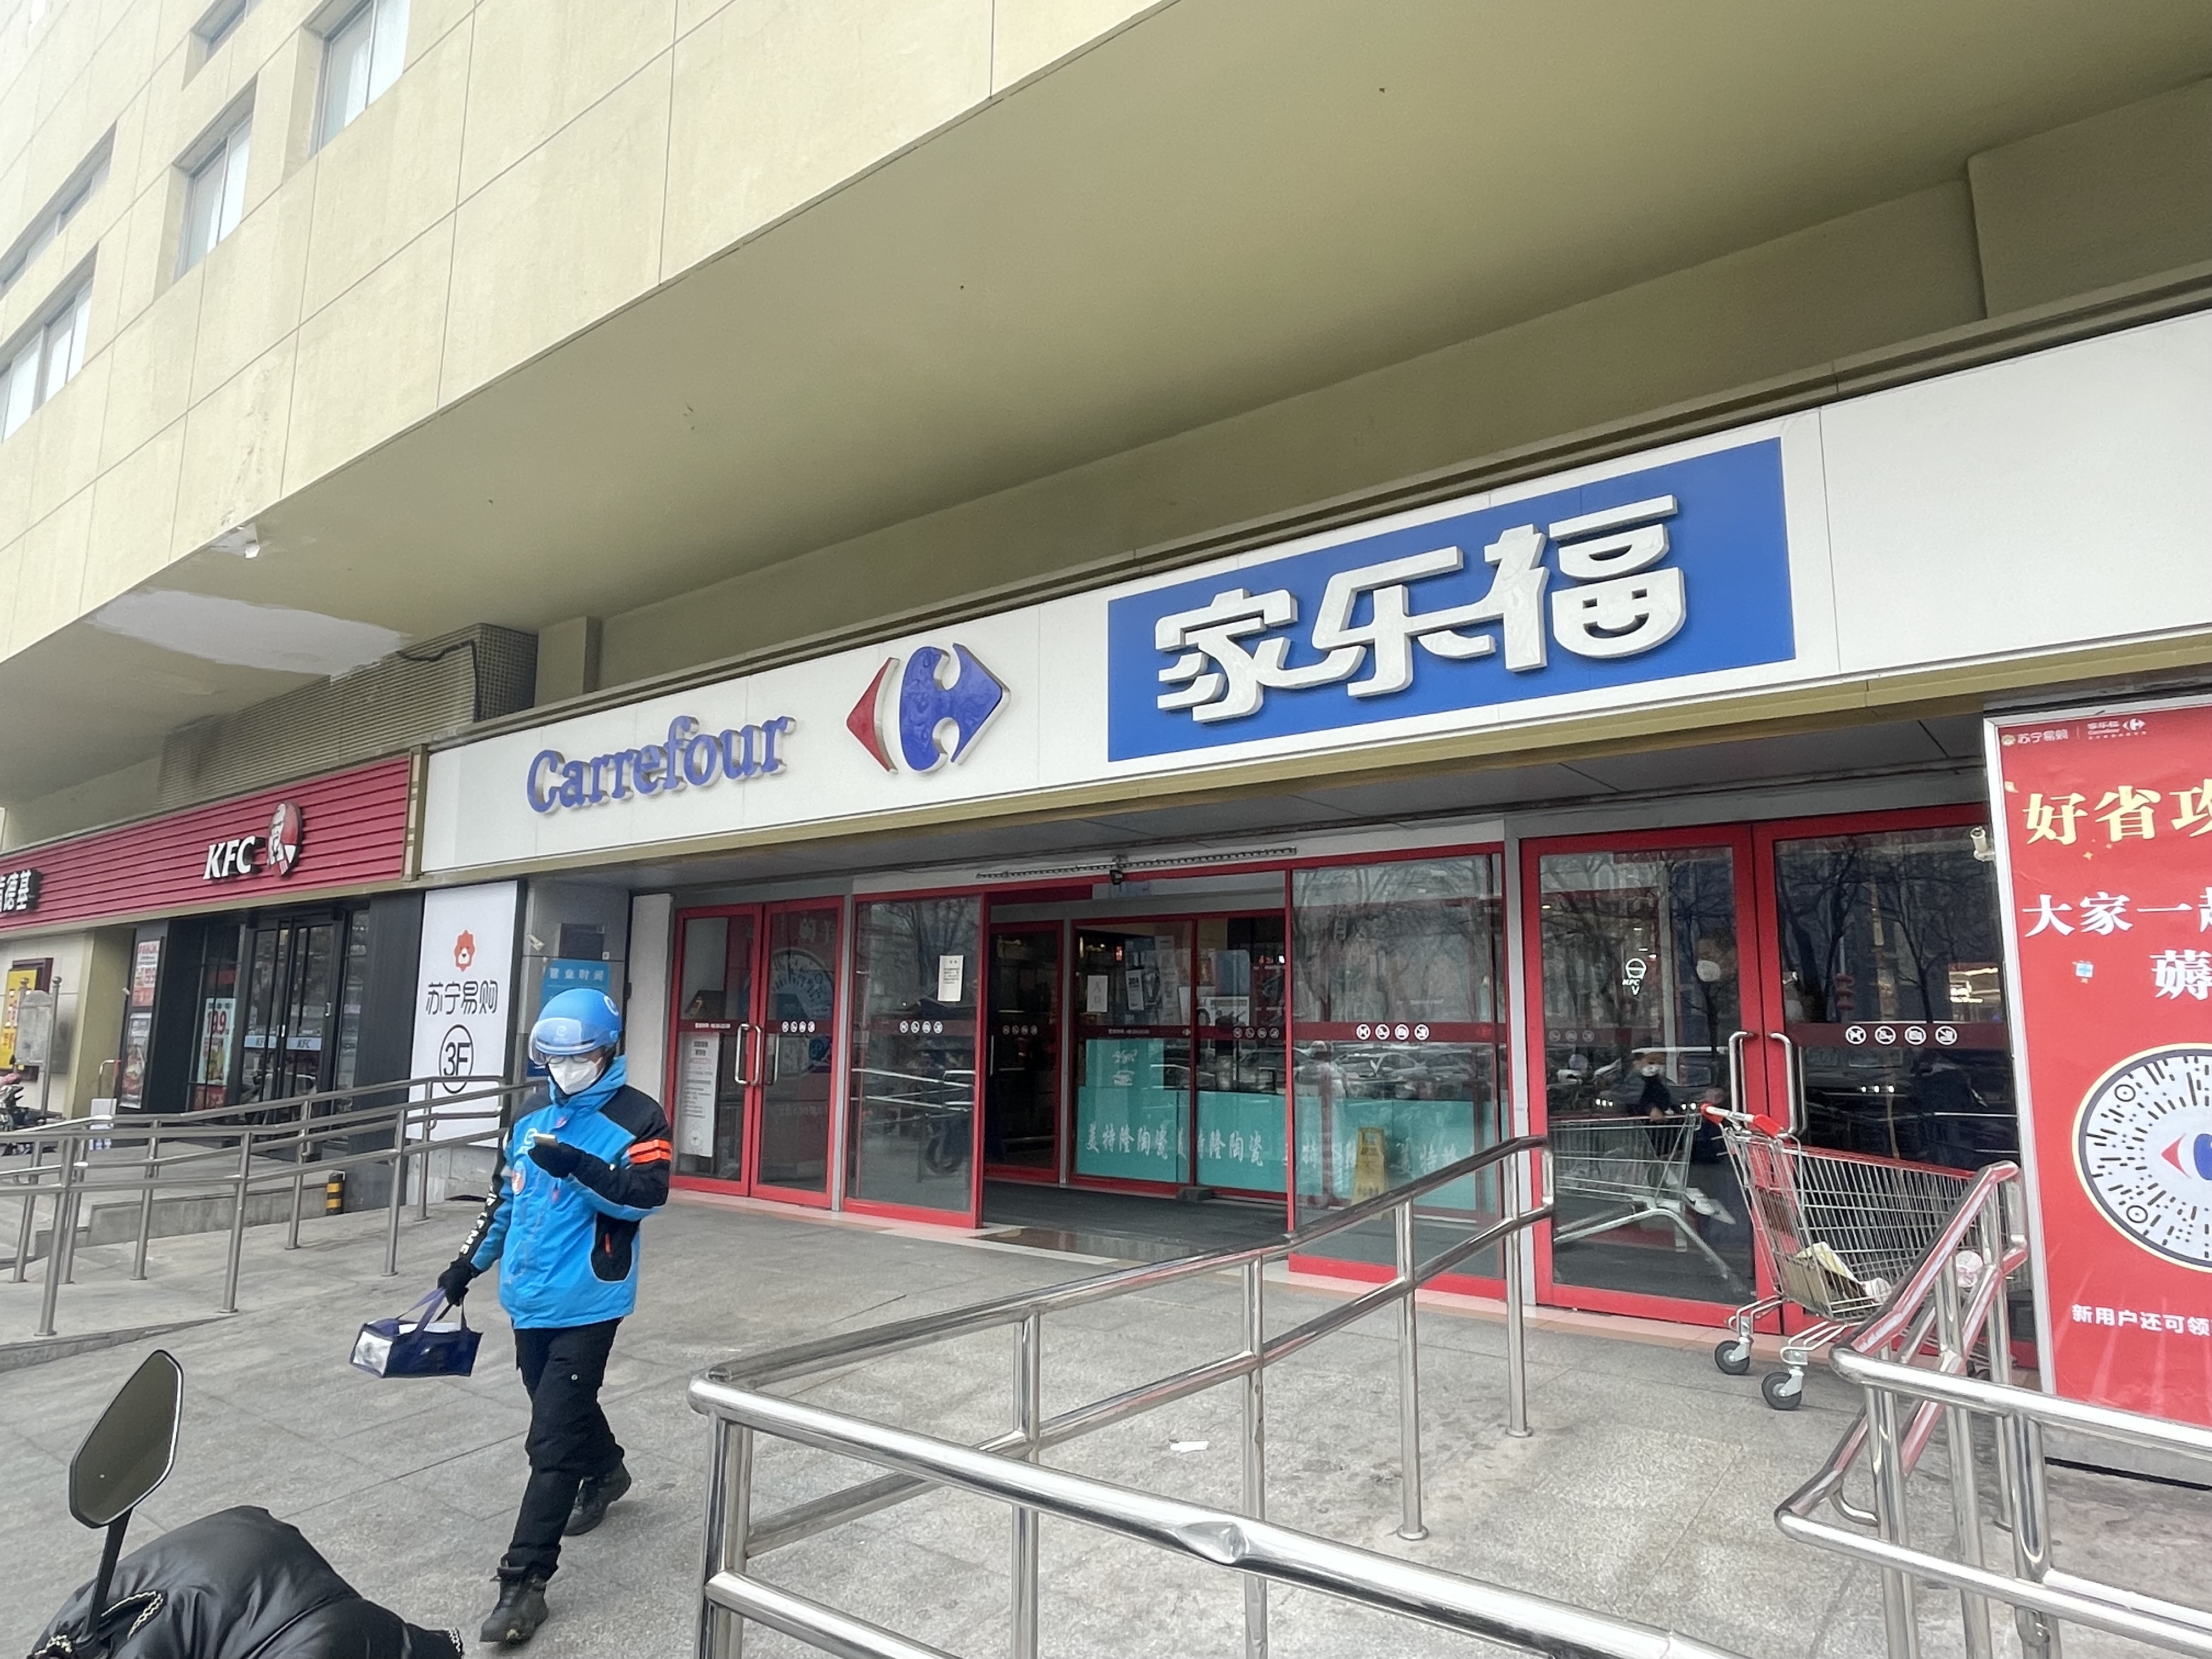 Carrefour China Fights to Stay Relevant in an E-Commerce Dominated Market